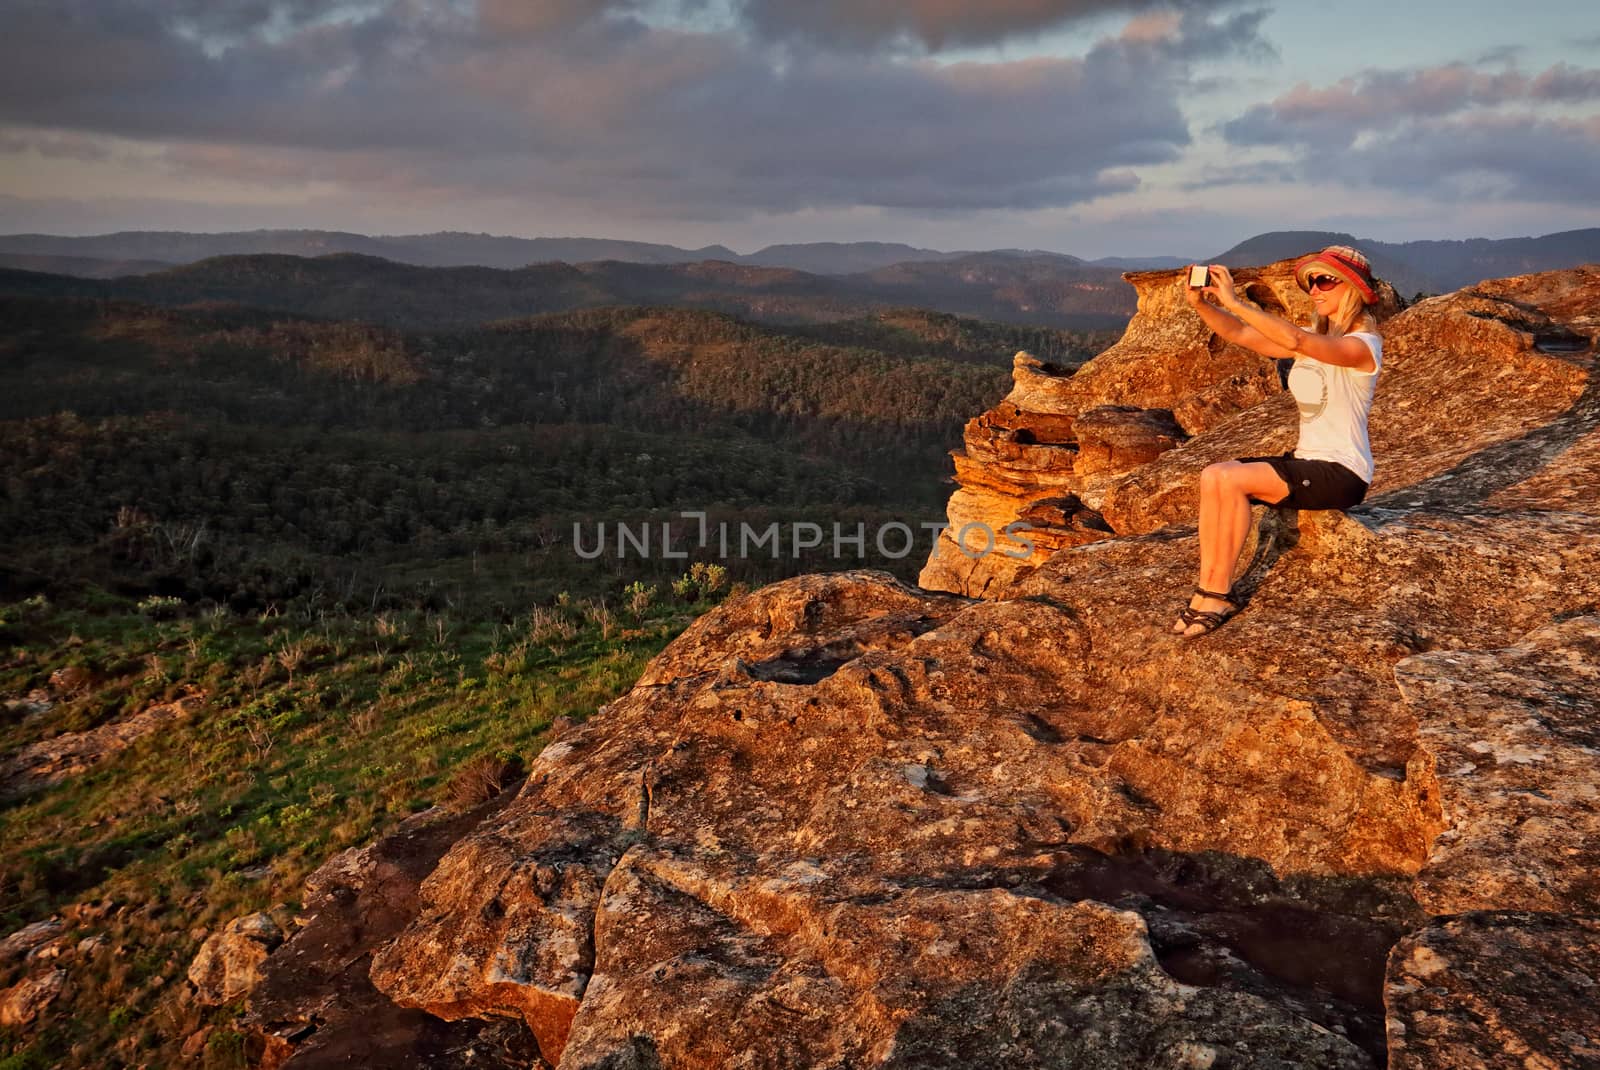 The selfie generation.  Woman taking a selfie with mobile phone in a rugged mountain landscape